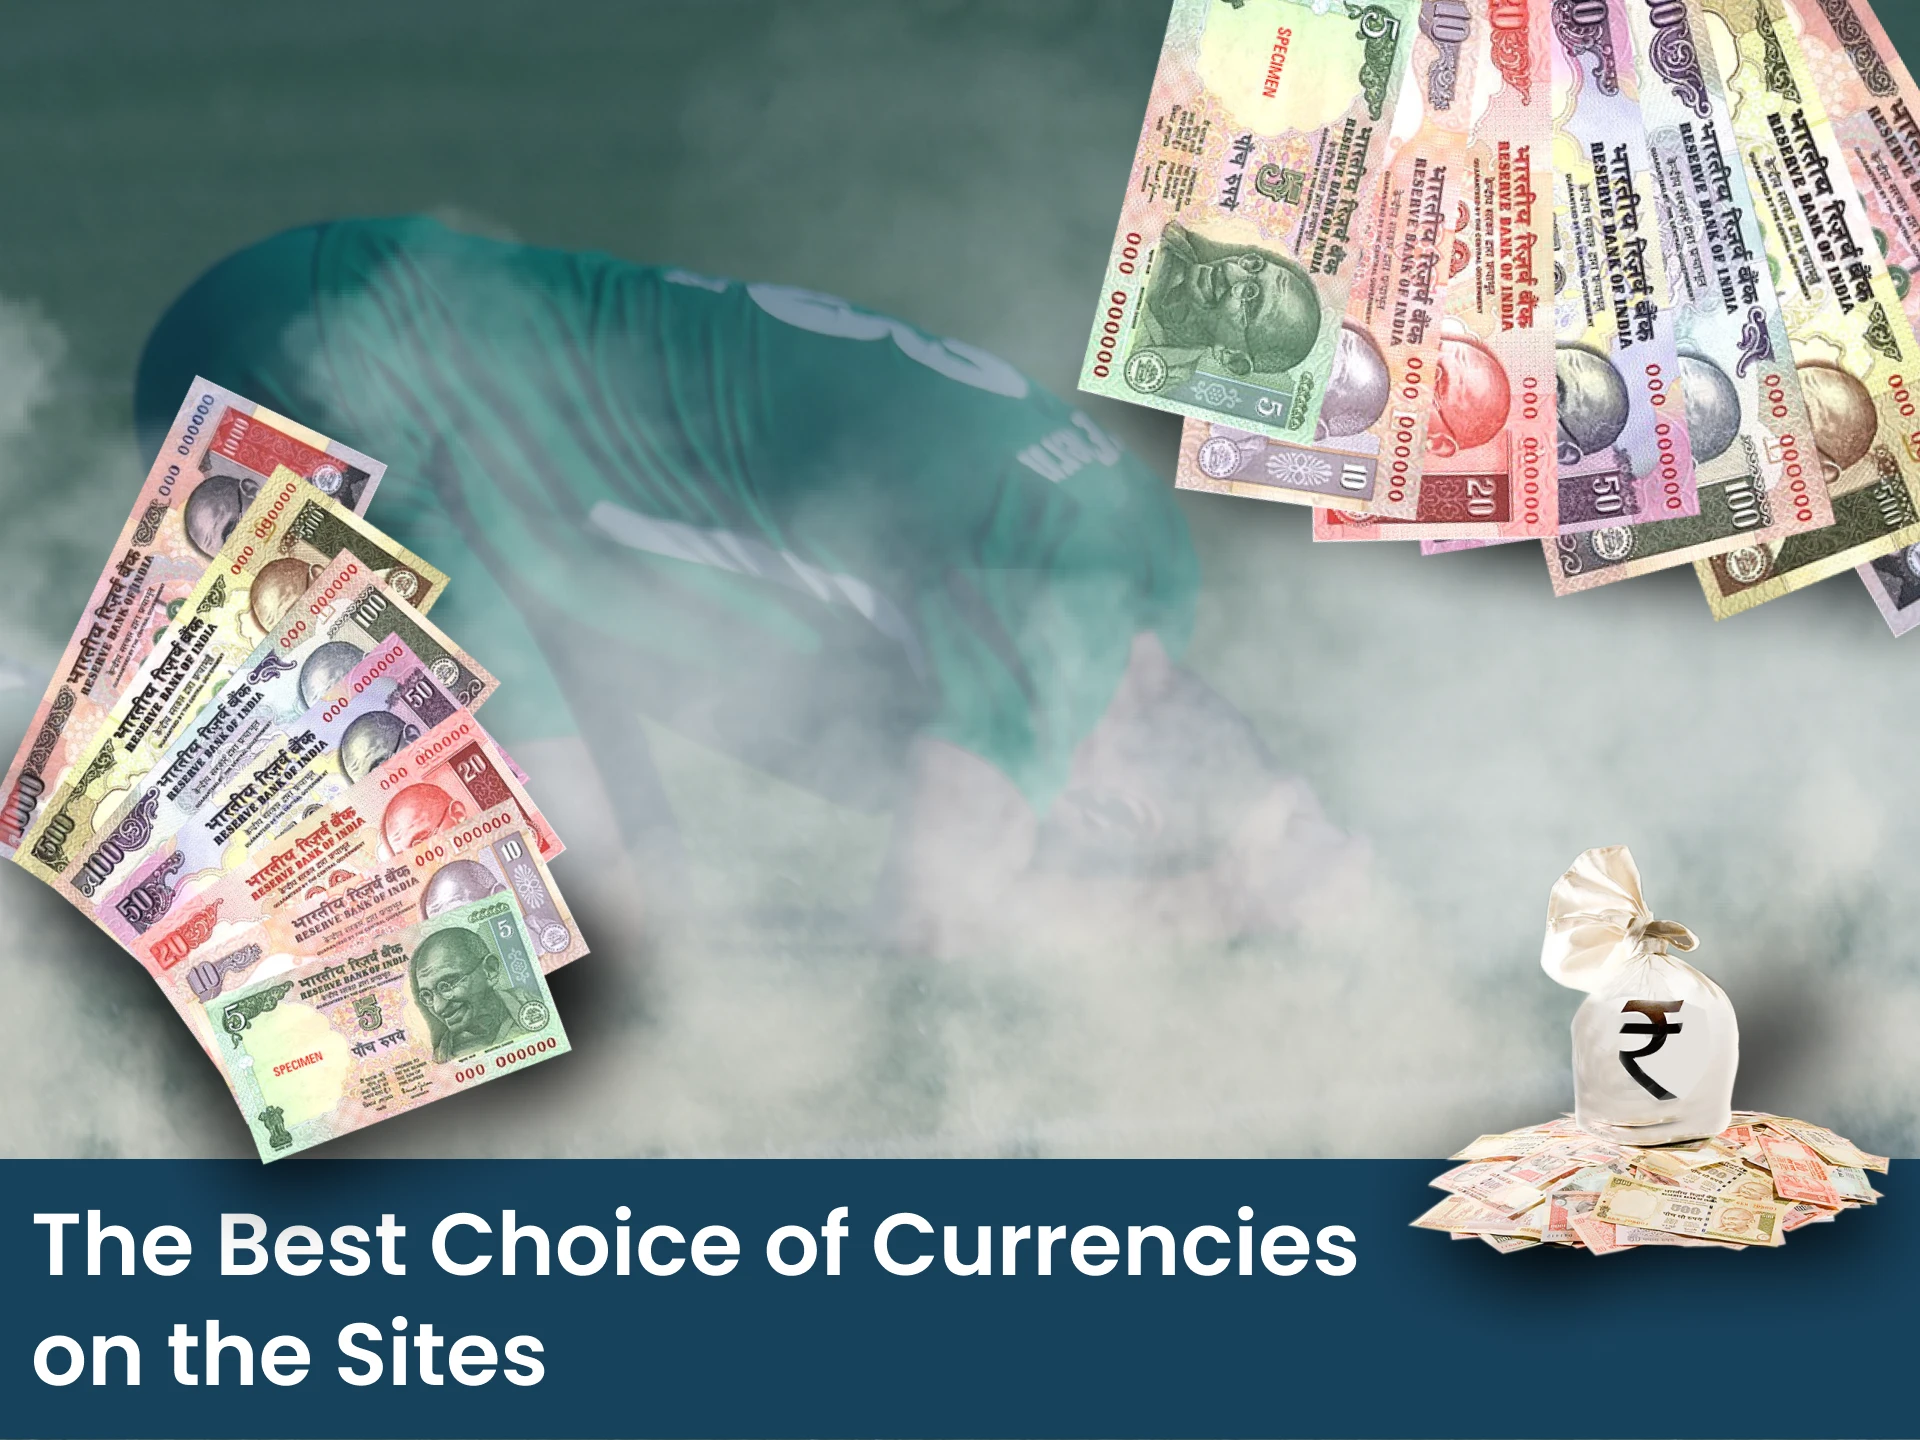 Use one of these currencies and deposit at the betting site.